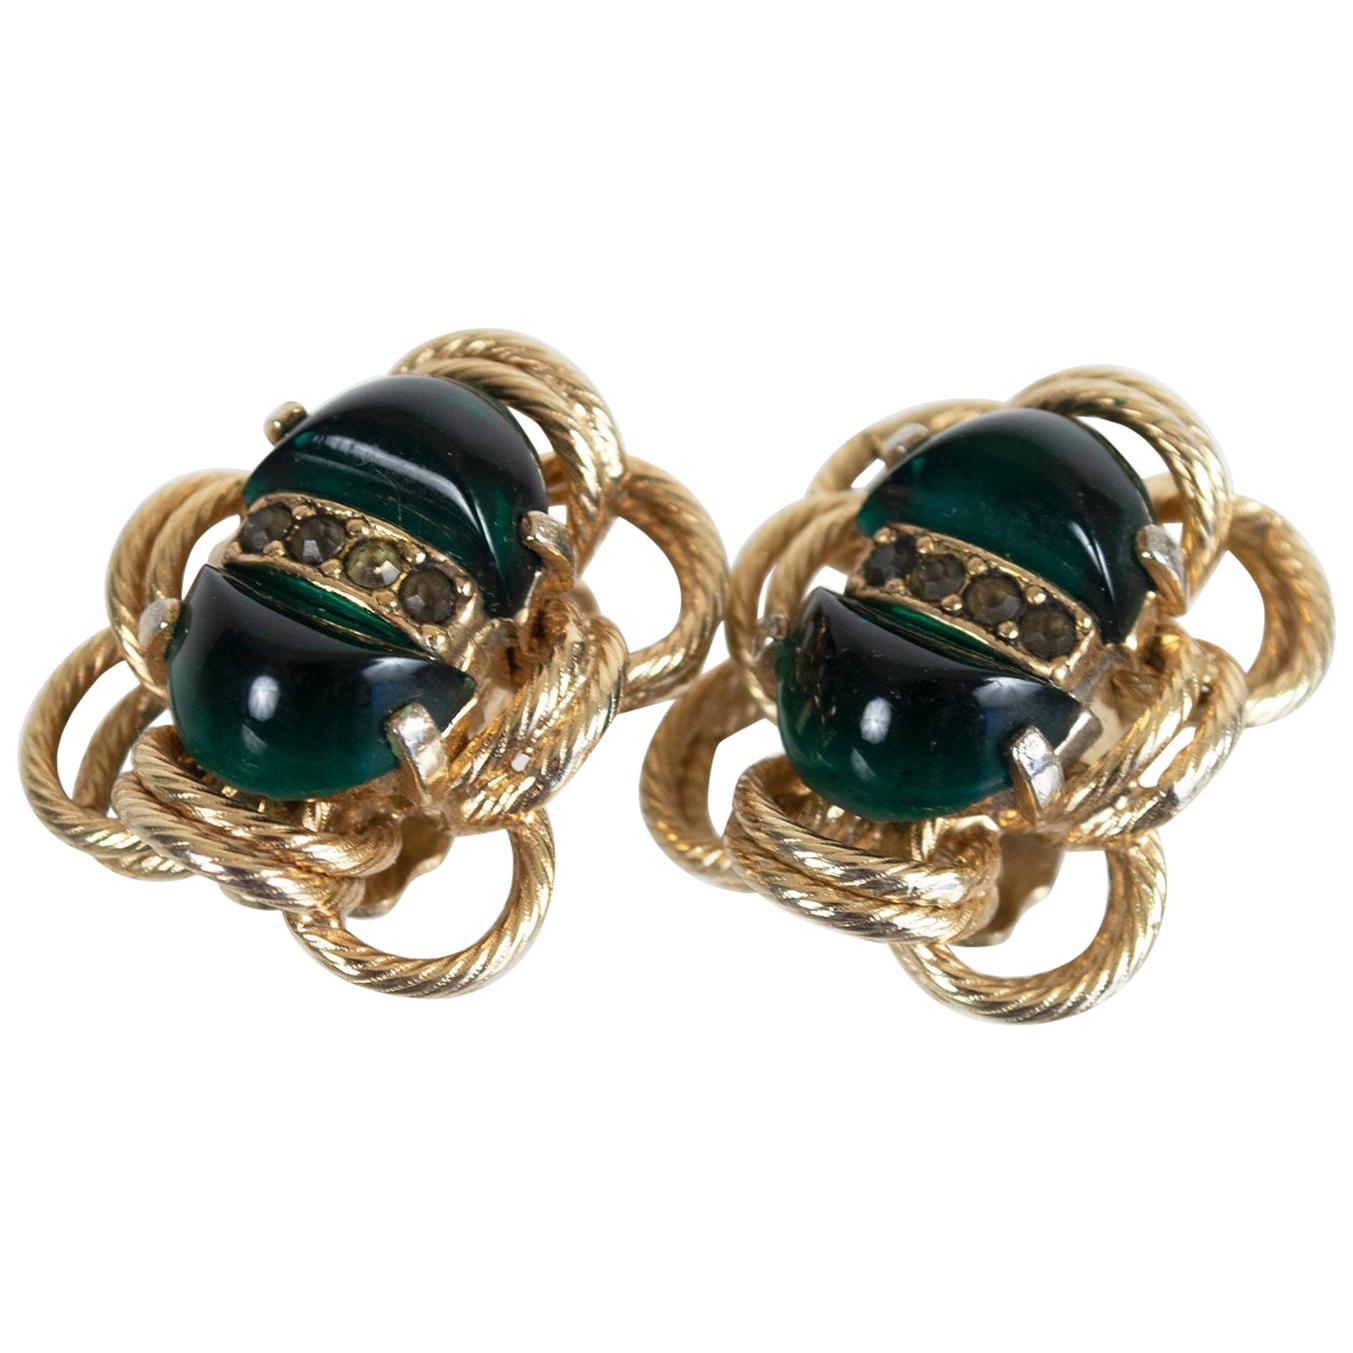 Signed Eisenberg Gold and Emerald Green Glass Cabochon Scarab Earrings, 1960s